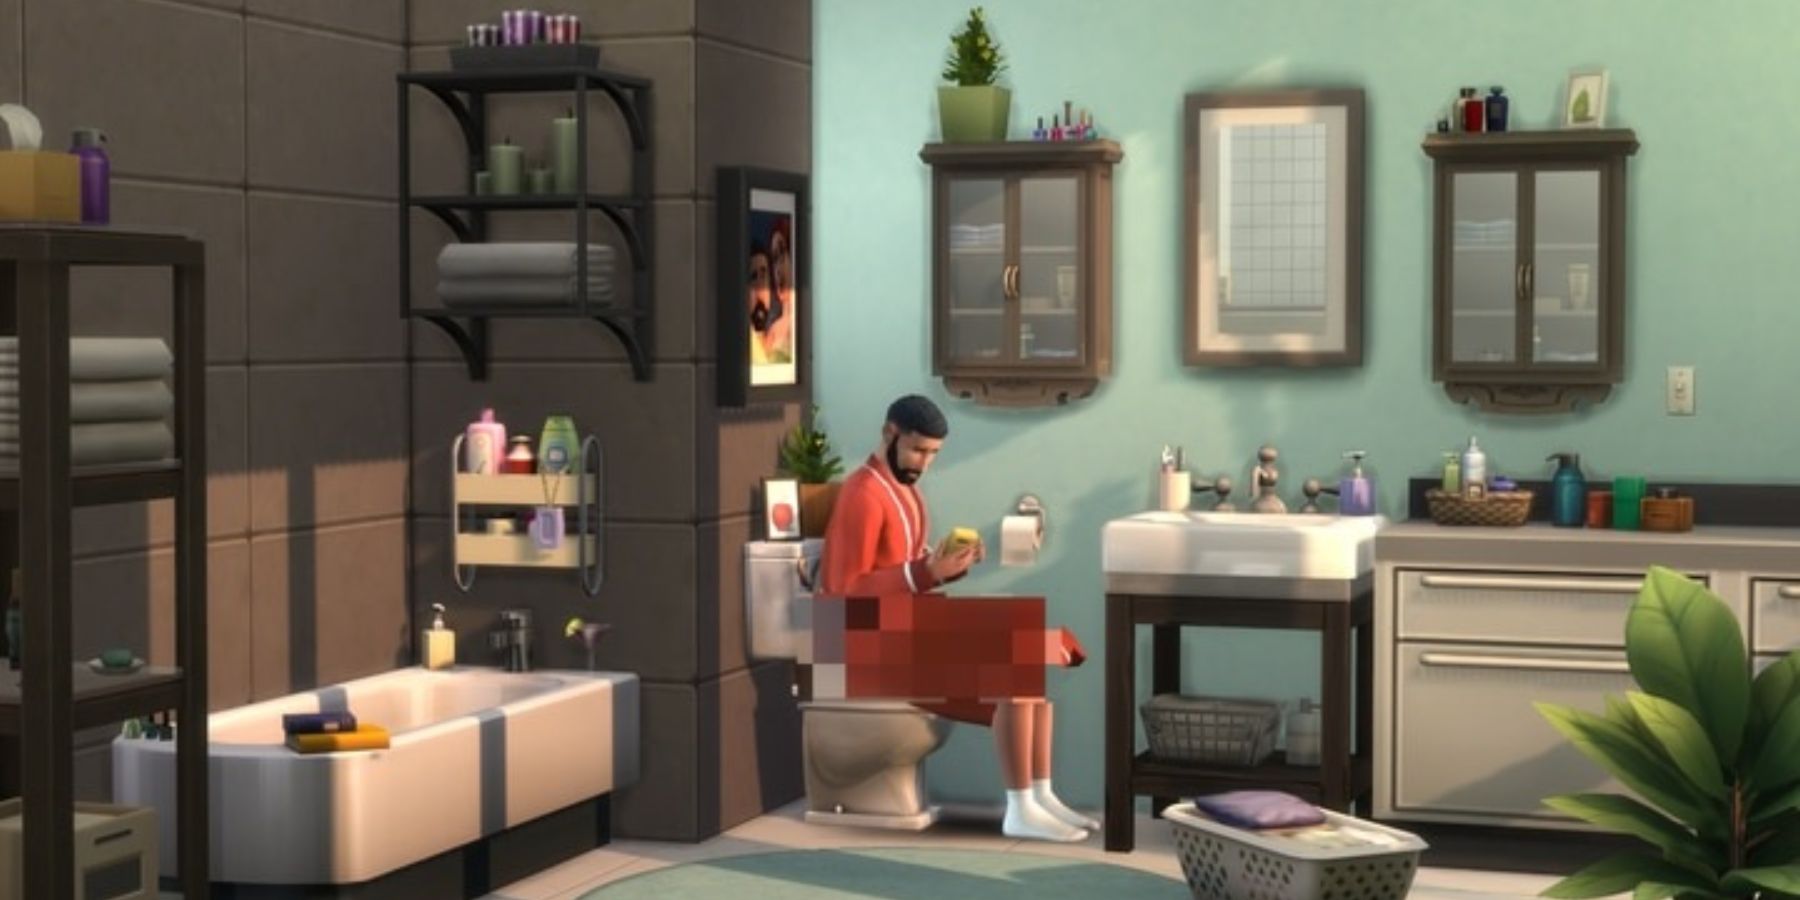 bob pancakes in a cluttered bathroom